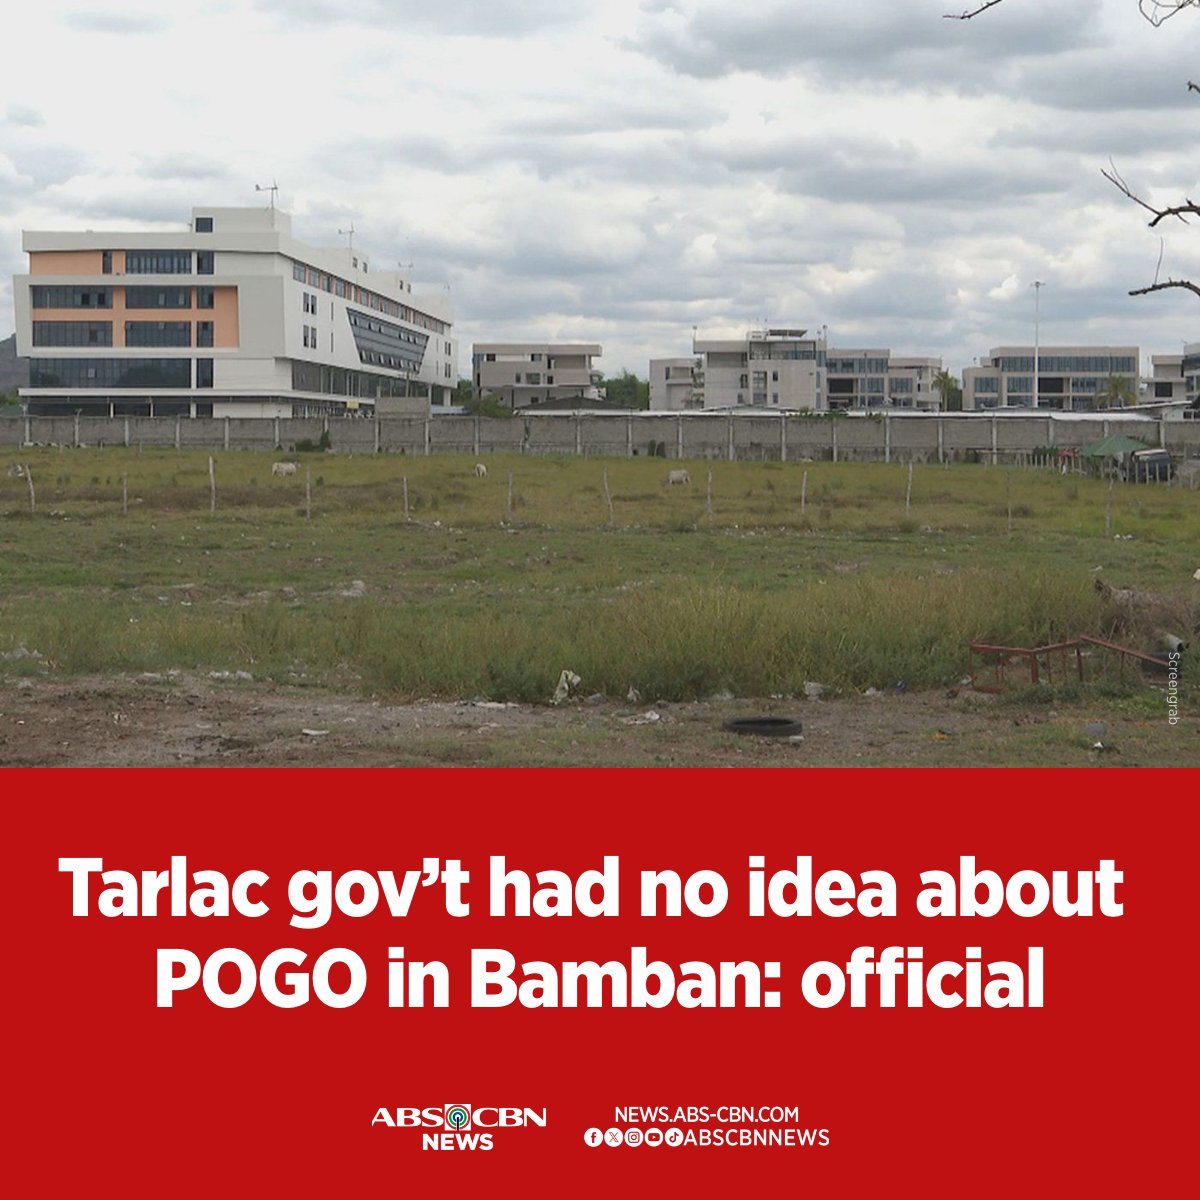 The local government of Tarlac said they have no idea that Bamban's Baofu compound is being used for illegal activities, nor are they familiar with Mayor Alice Guo's background. READ: abscbn.news/4akPSsH